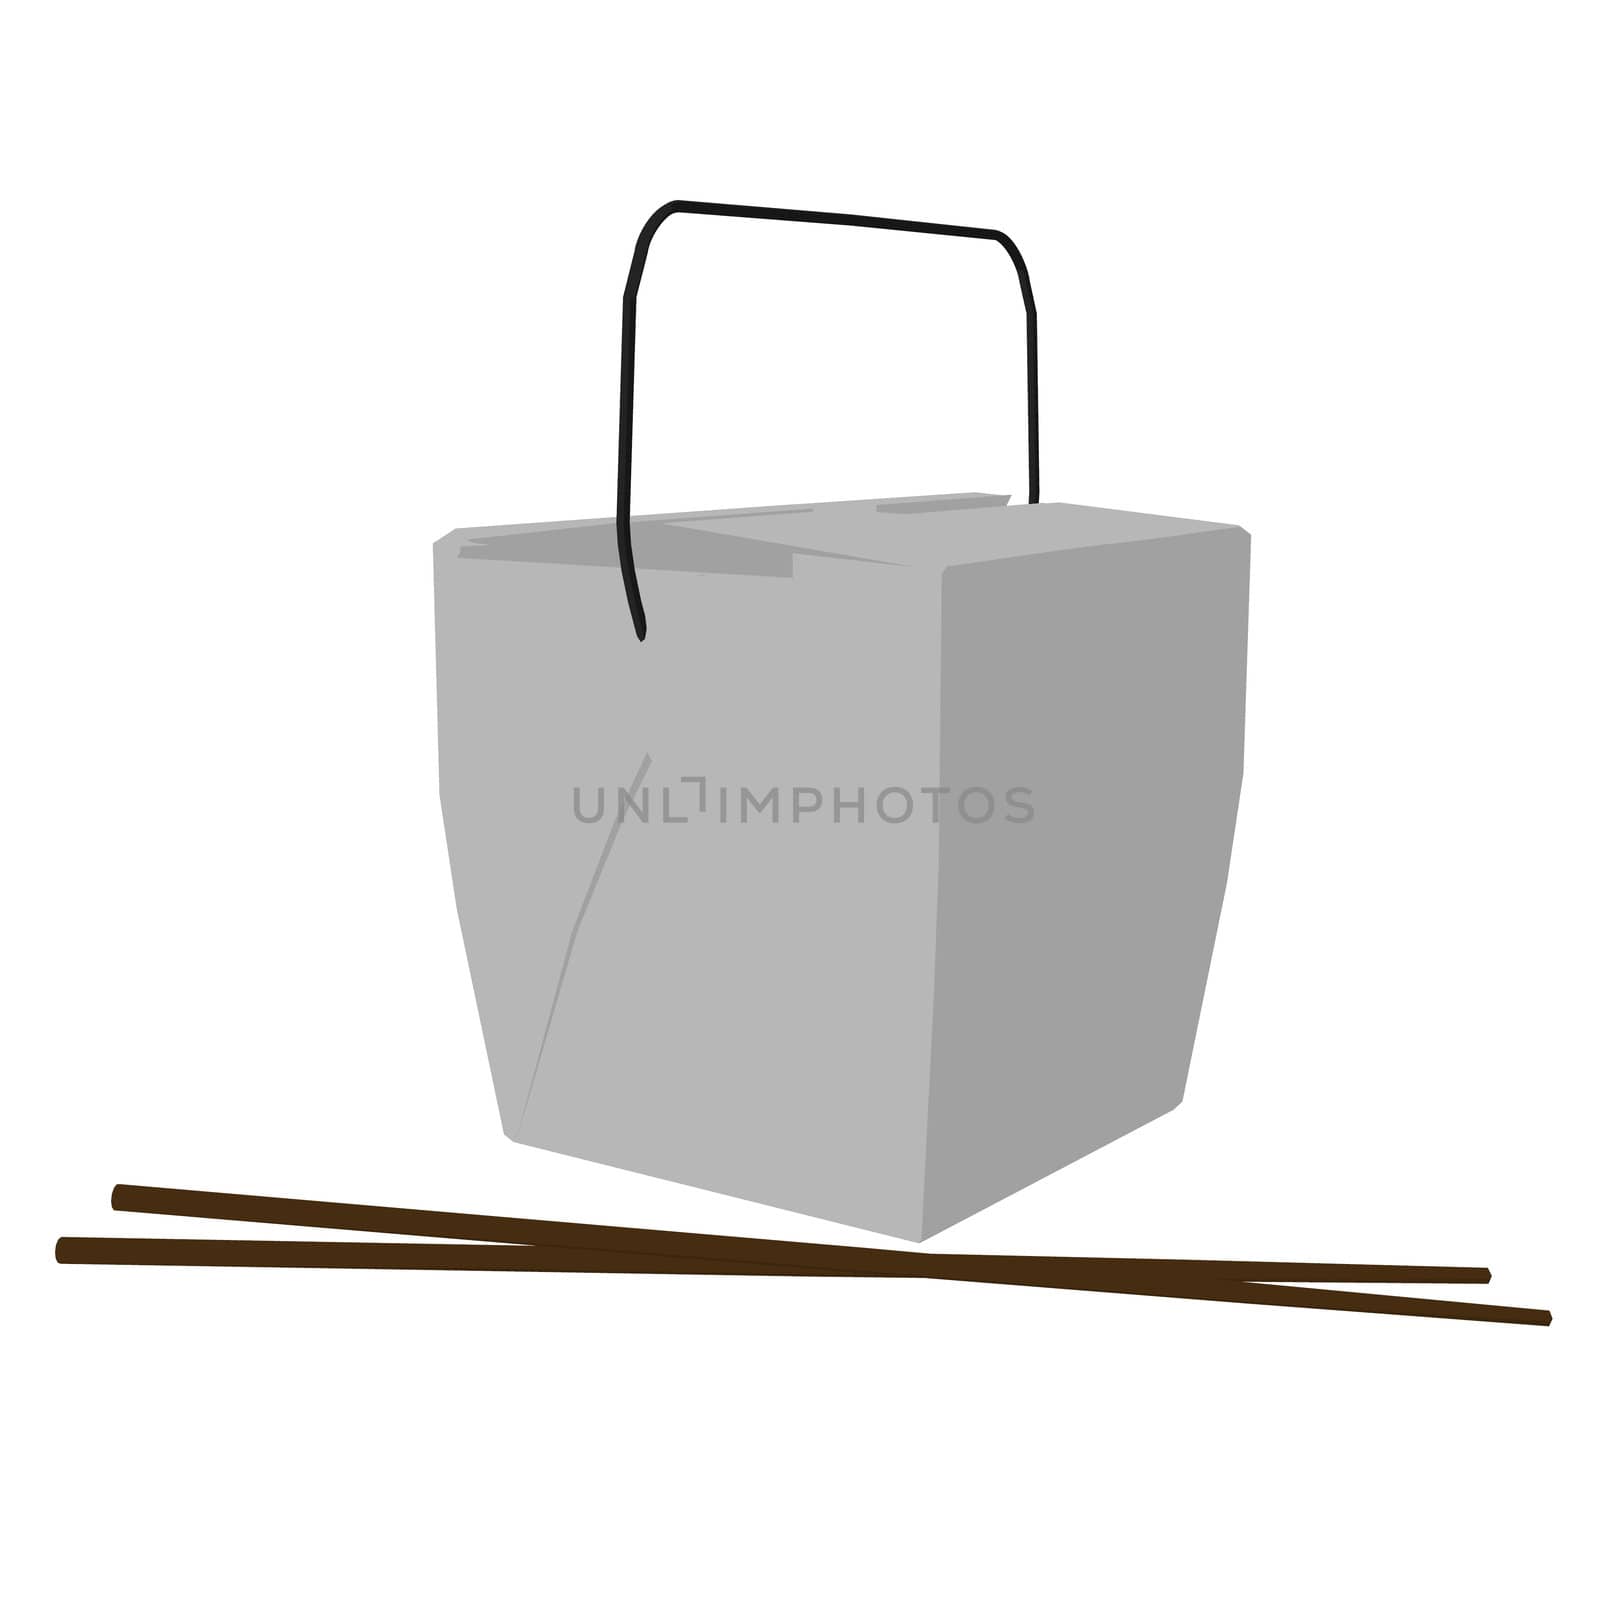 Takout Container and Chopsticks Illustration by kathygold